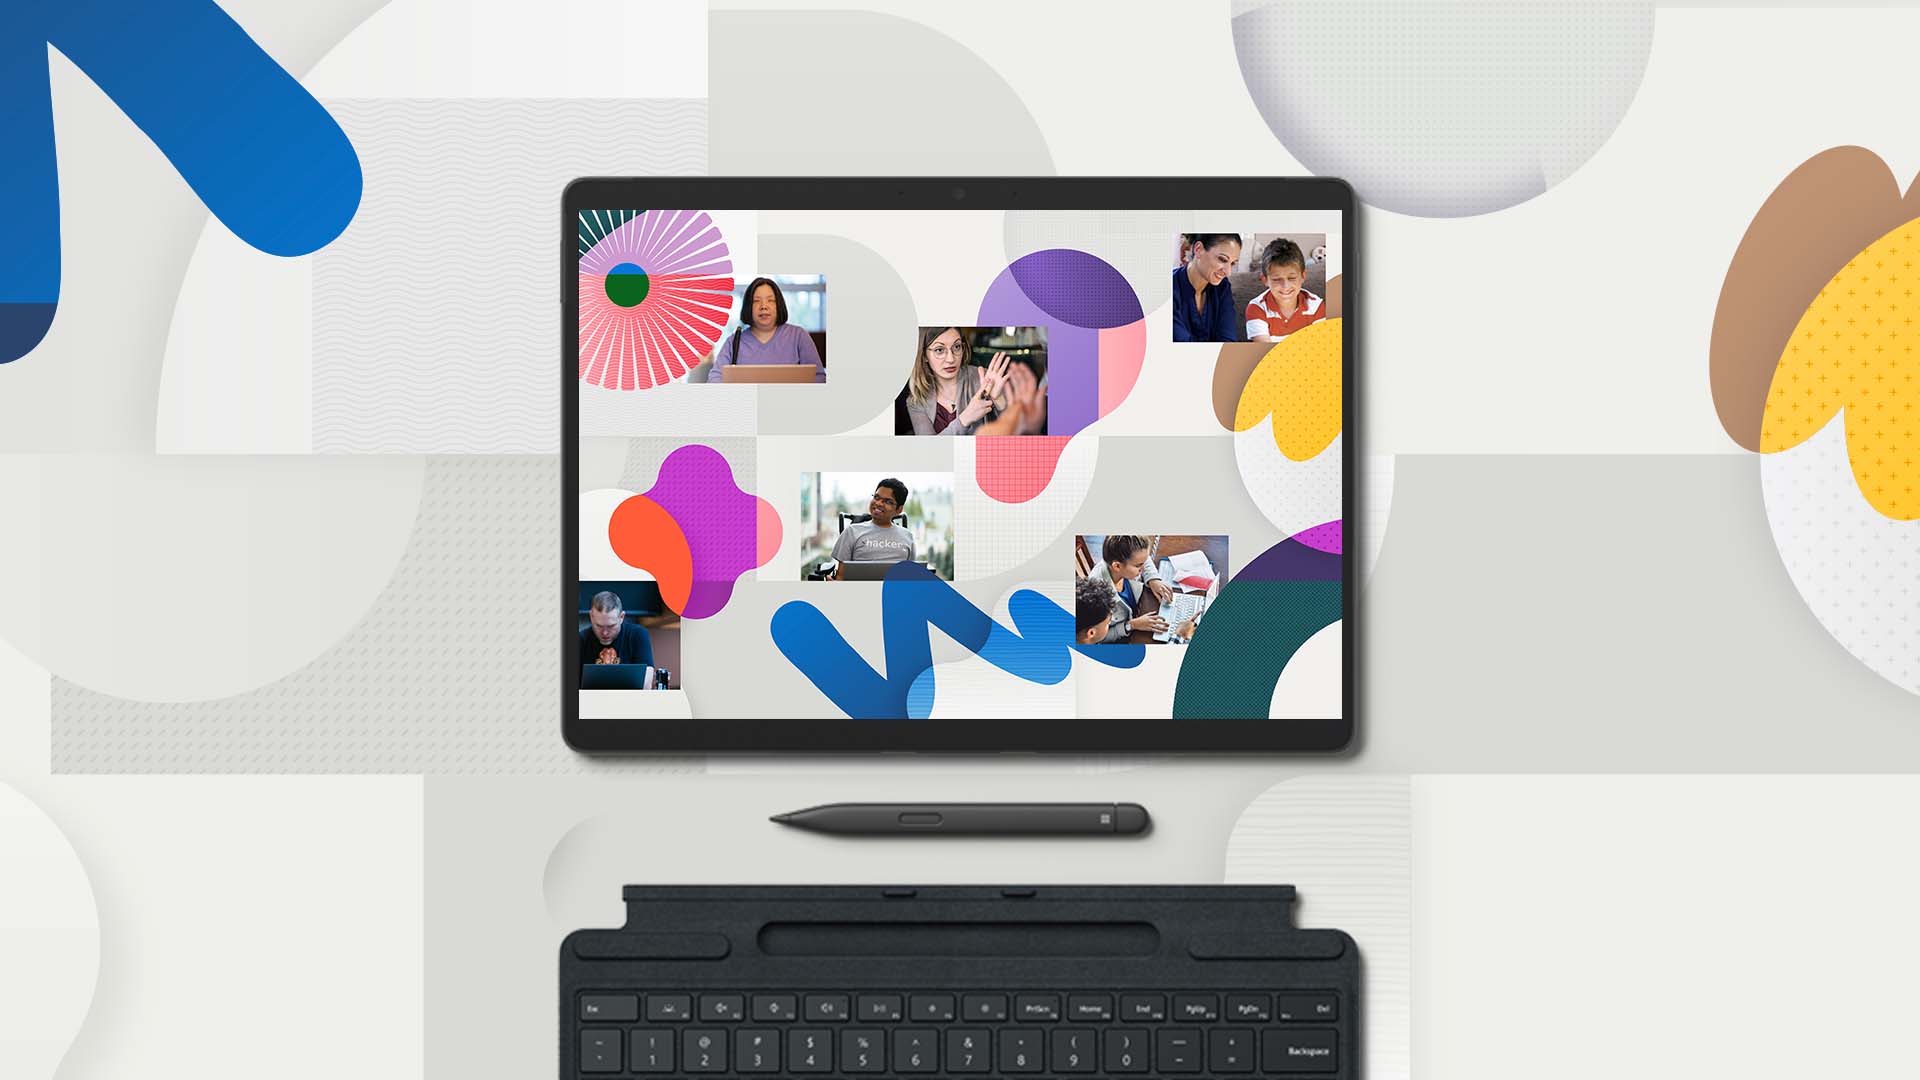 A collage of people learning and working is shown on a Surface Pro 8 device with a Surface pen and type cover below. It is surrounded by colorful abstract line art.